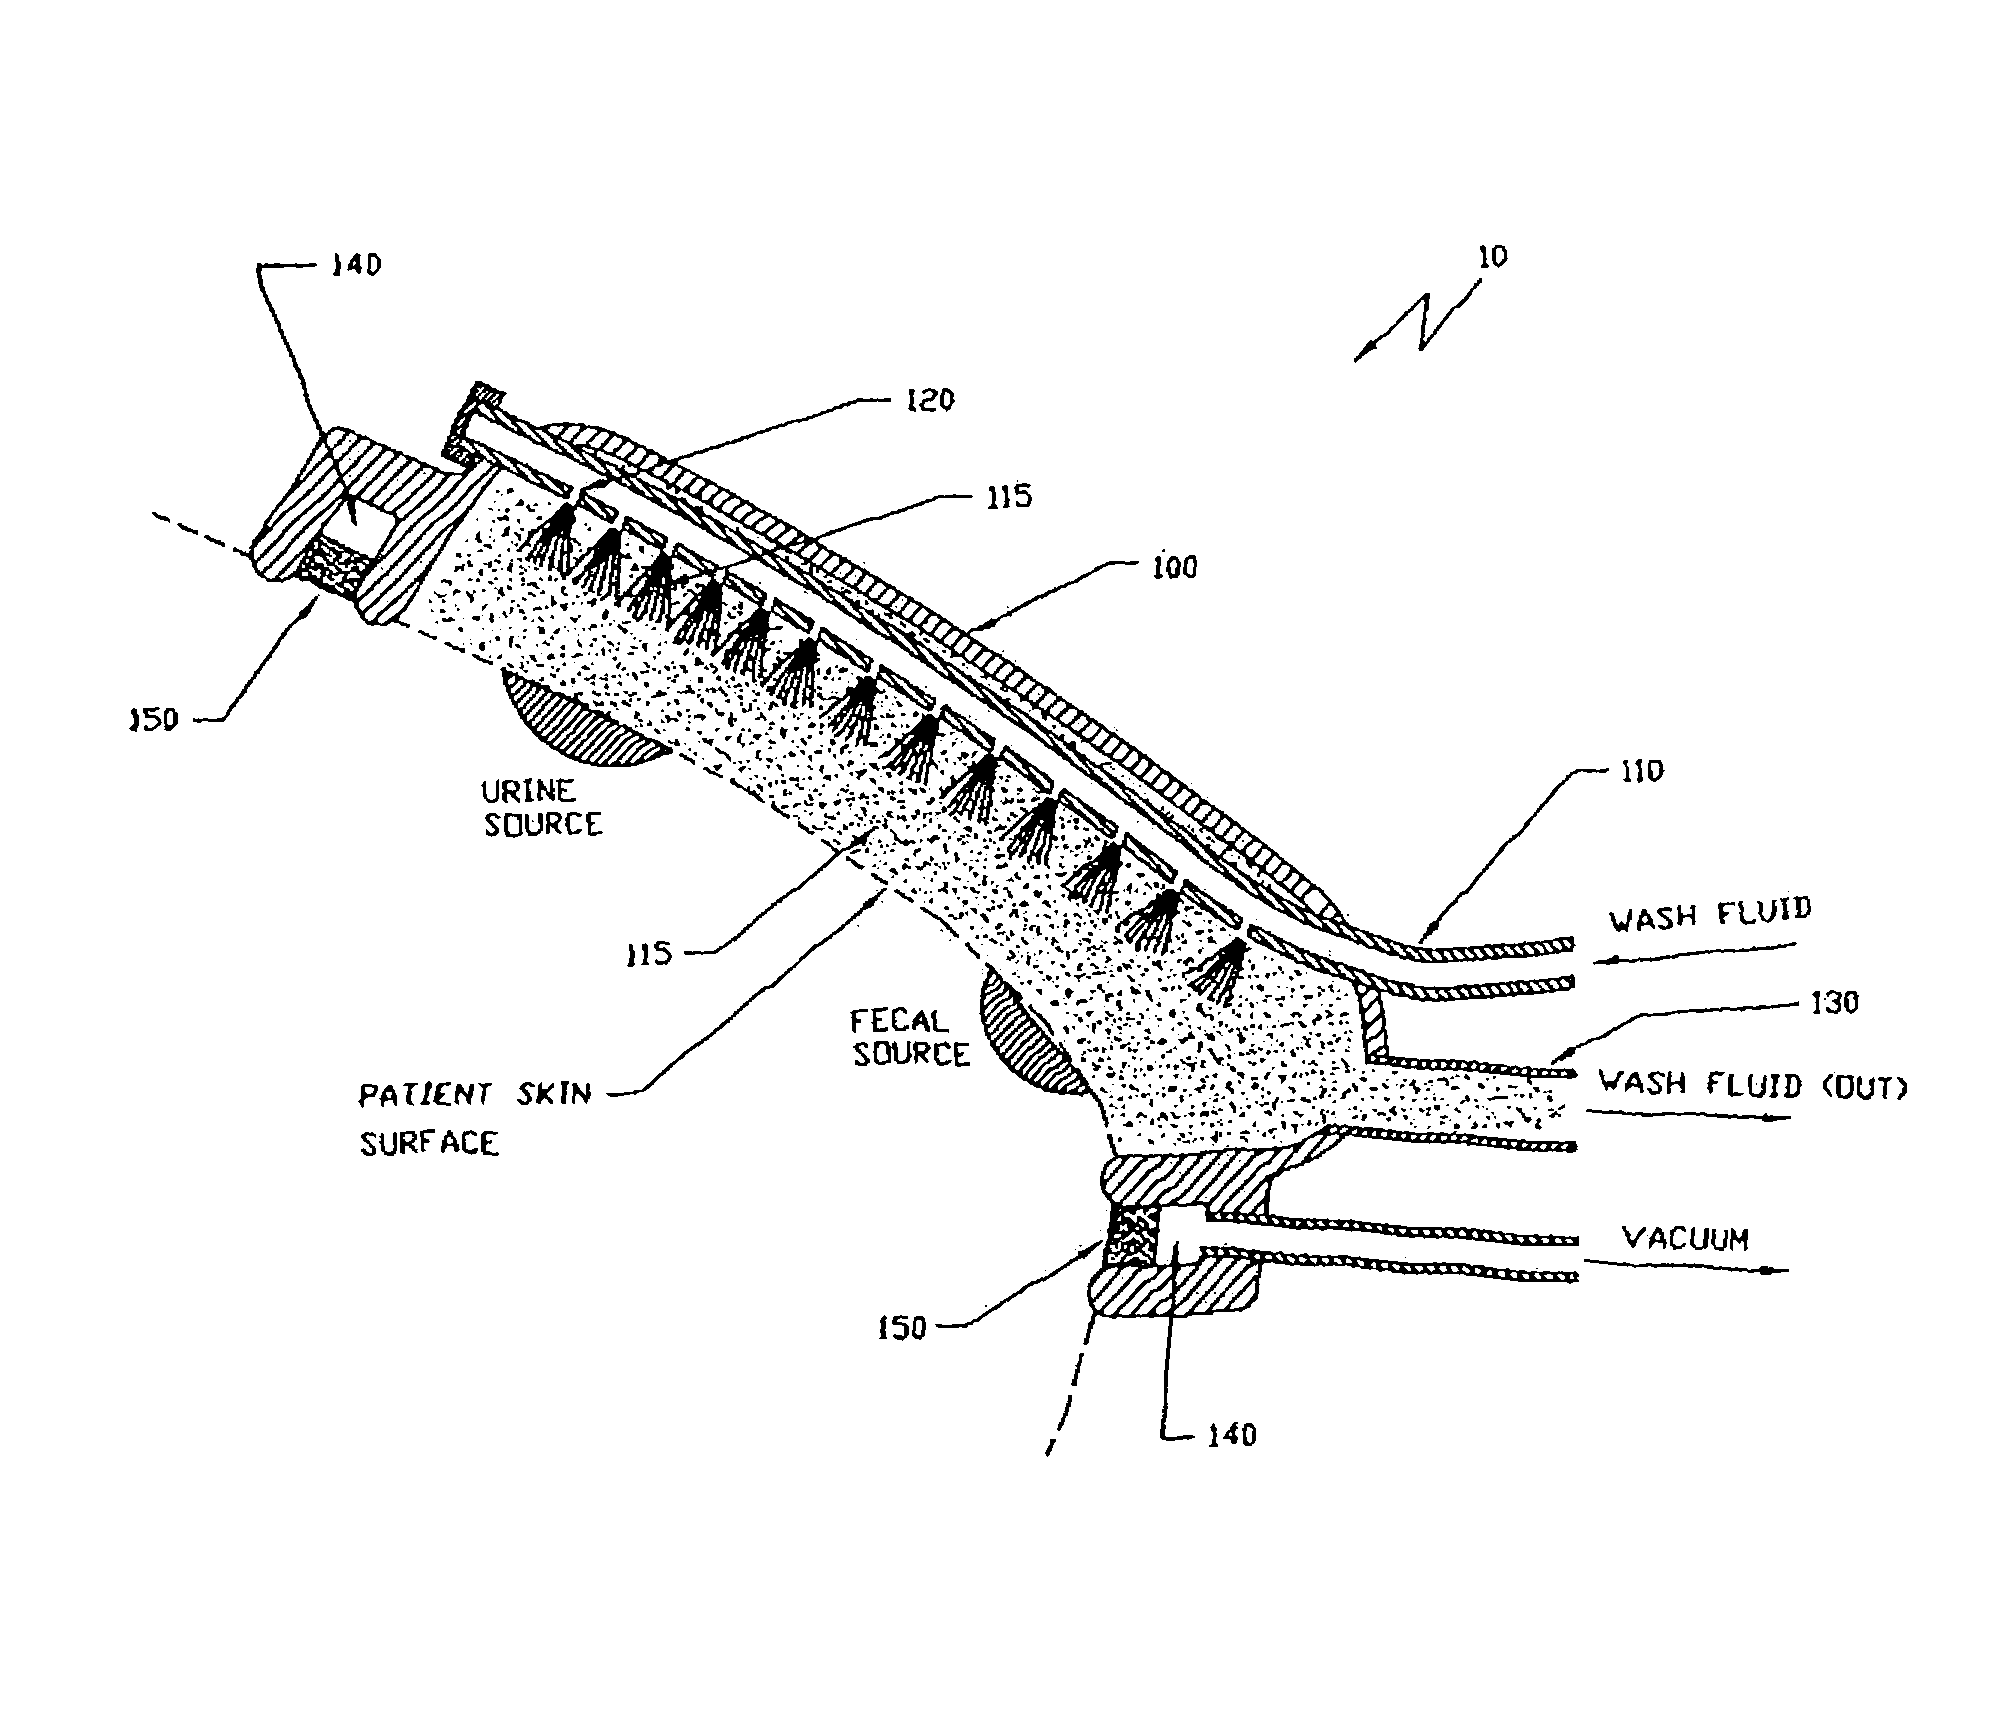 Apparatus and method for the removal and containment of human waste excretion